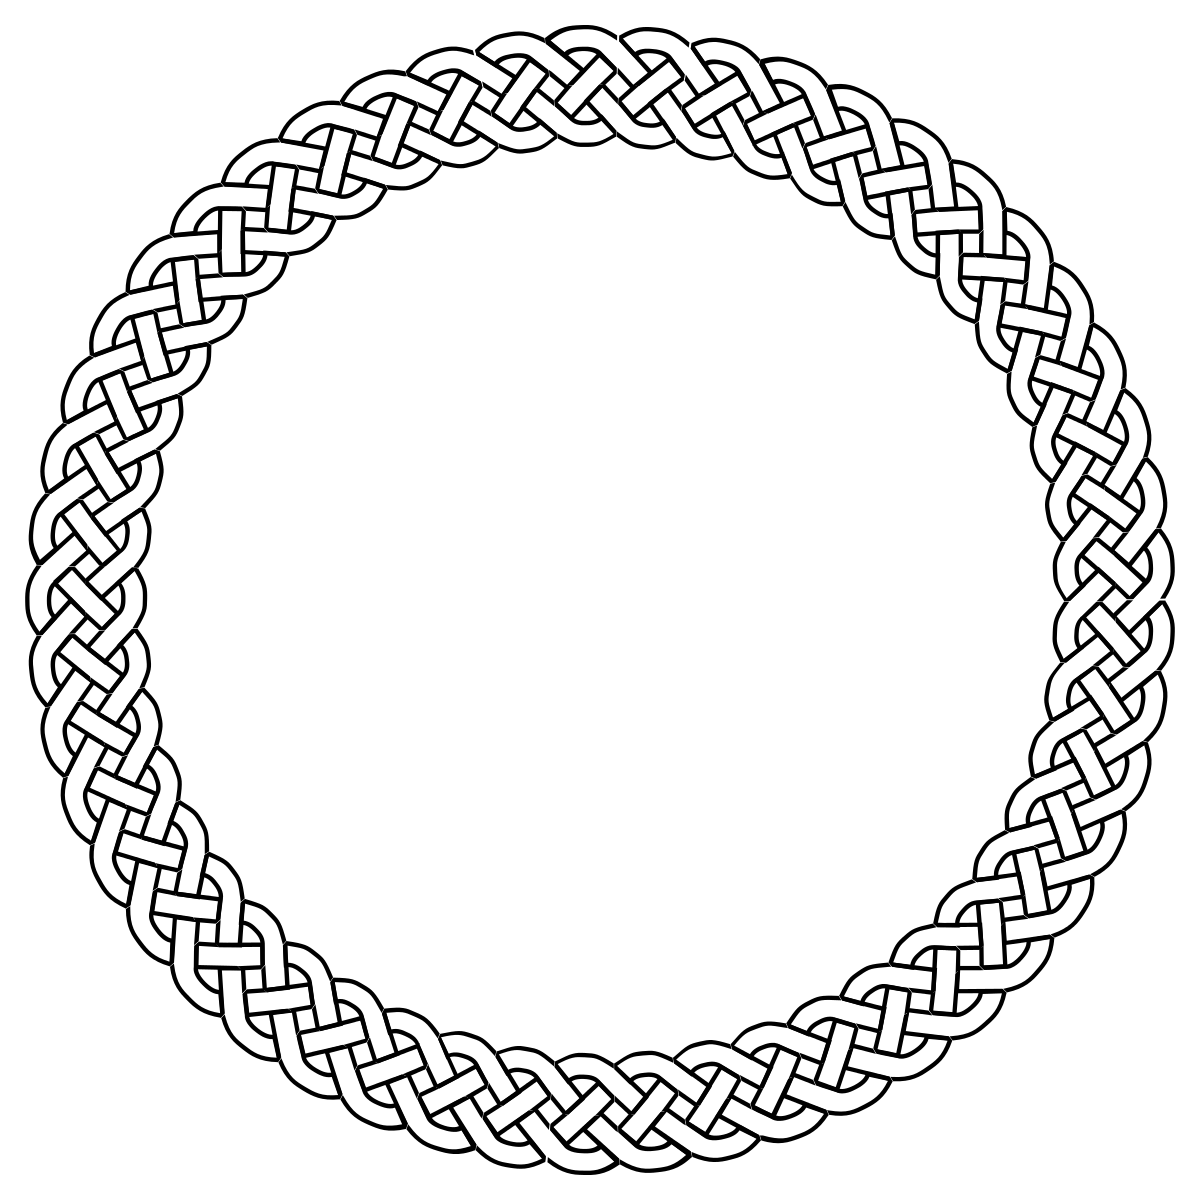 Free Round Rope Border 2 Clipart